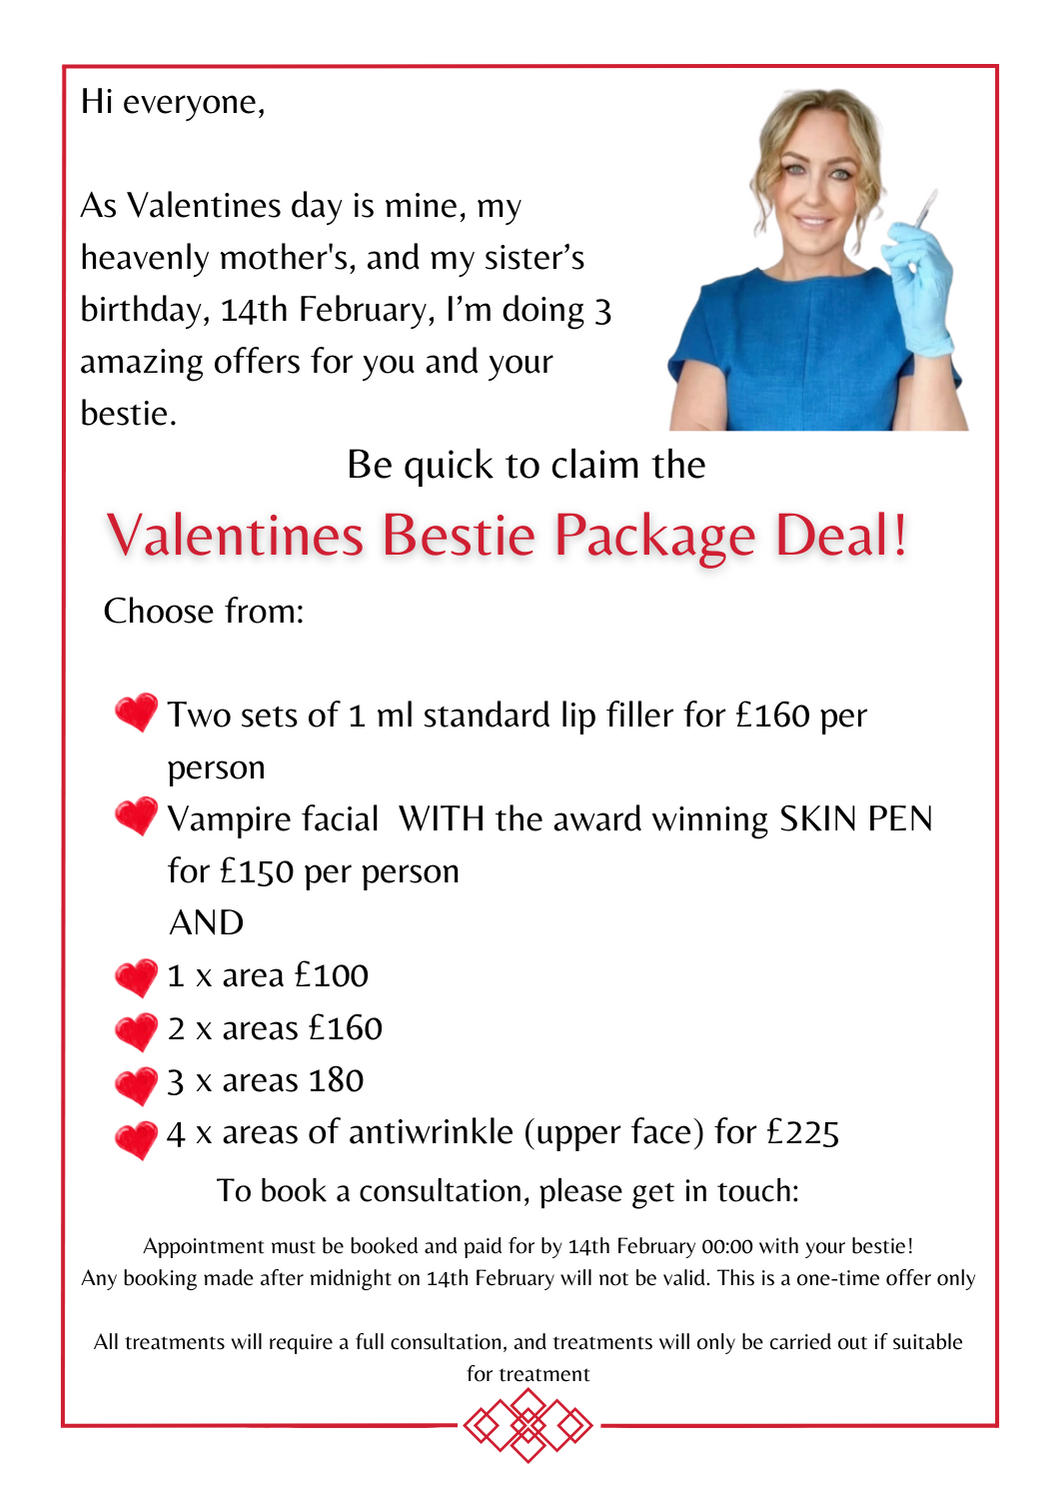 Taylor-made Valentines Day Special Offers